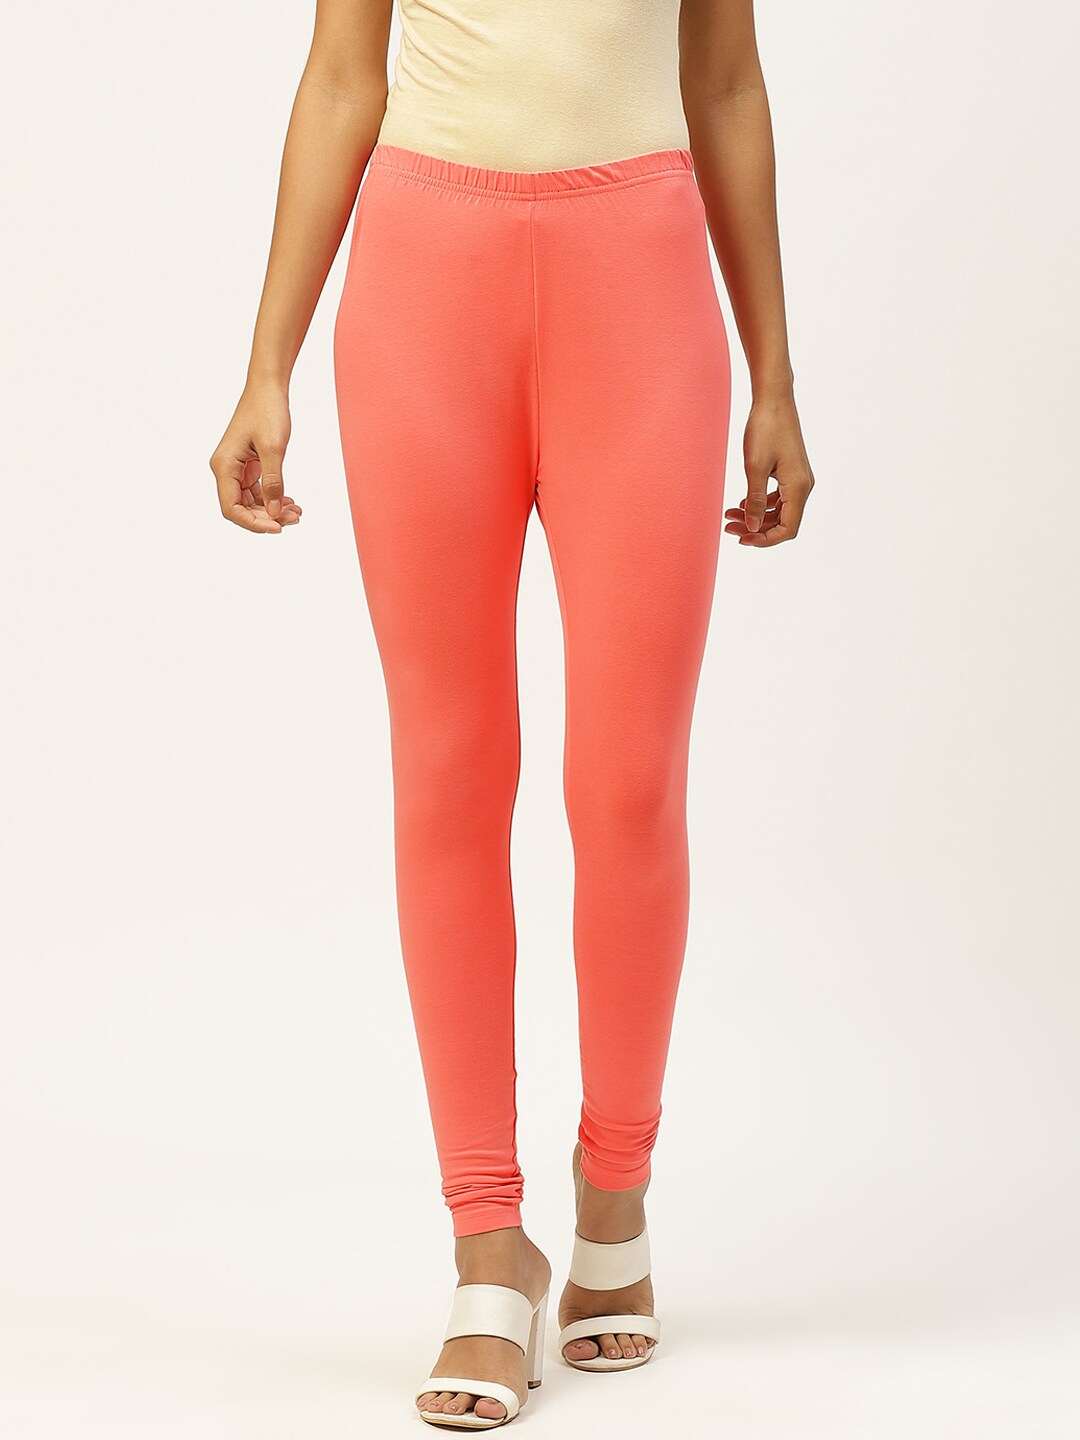 Monte Carlo Women Coral Orange Solid Knitted Pure Cotton Churidar Leggings Price in India